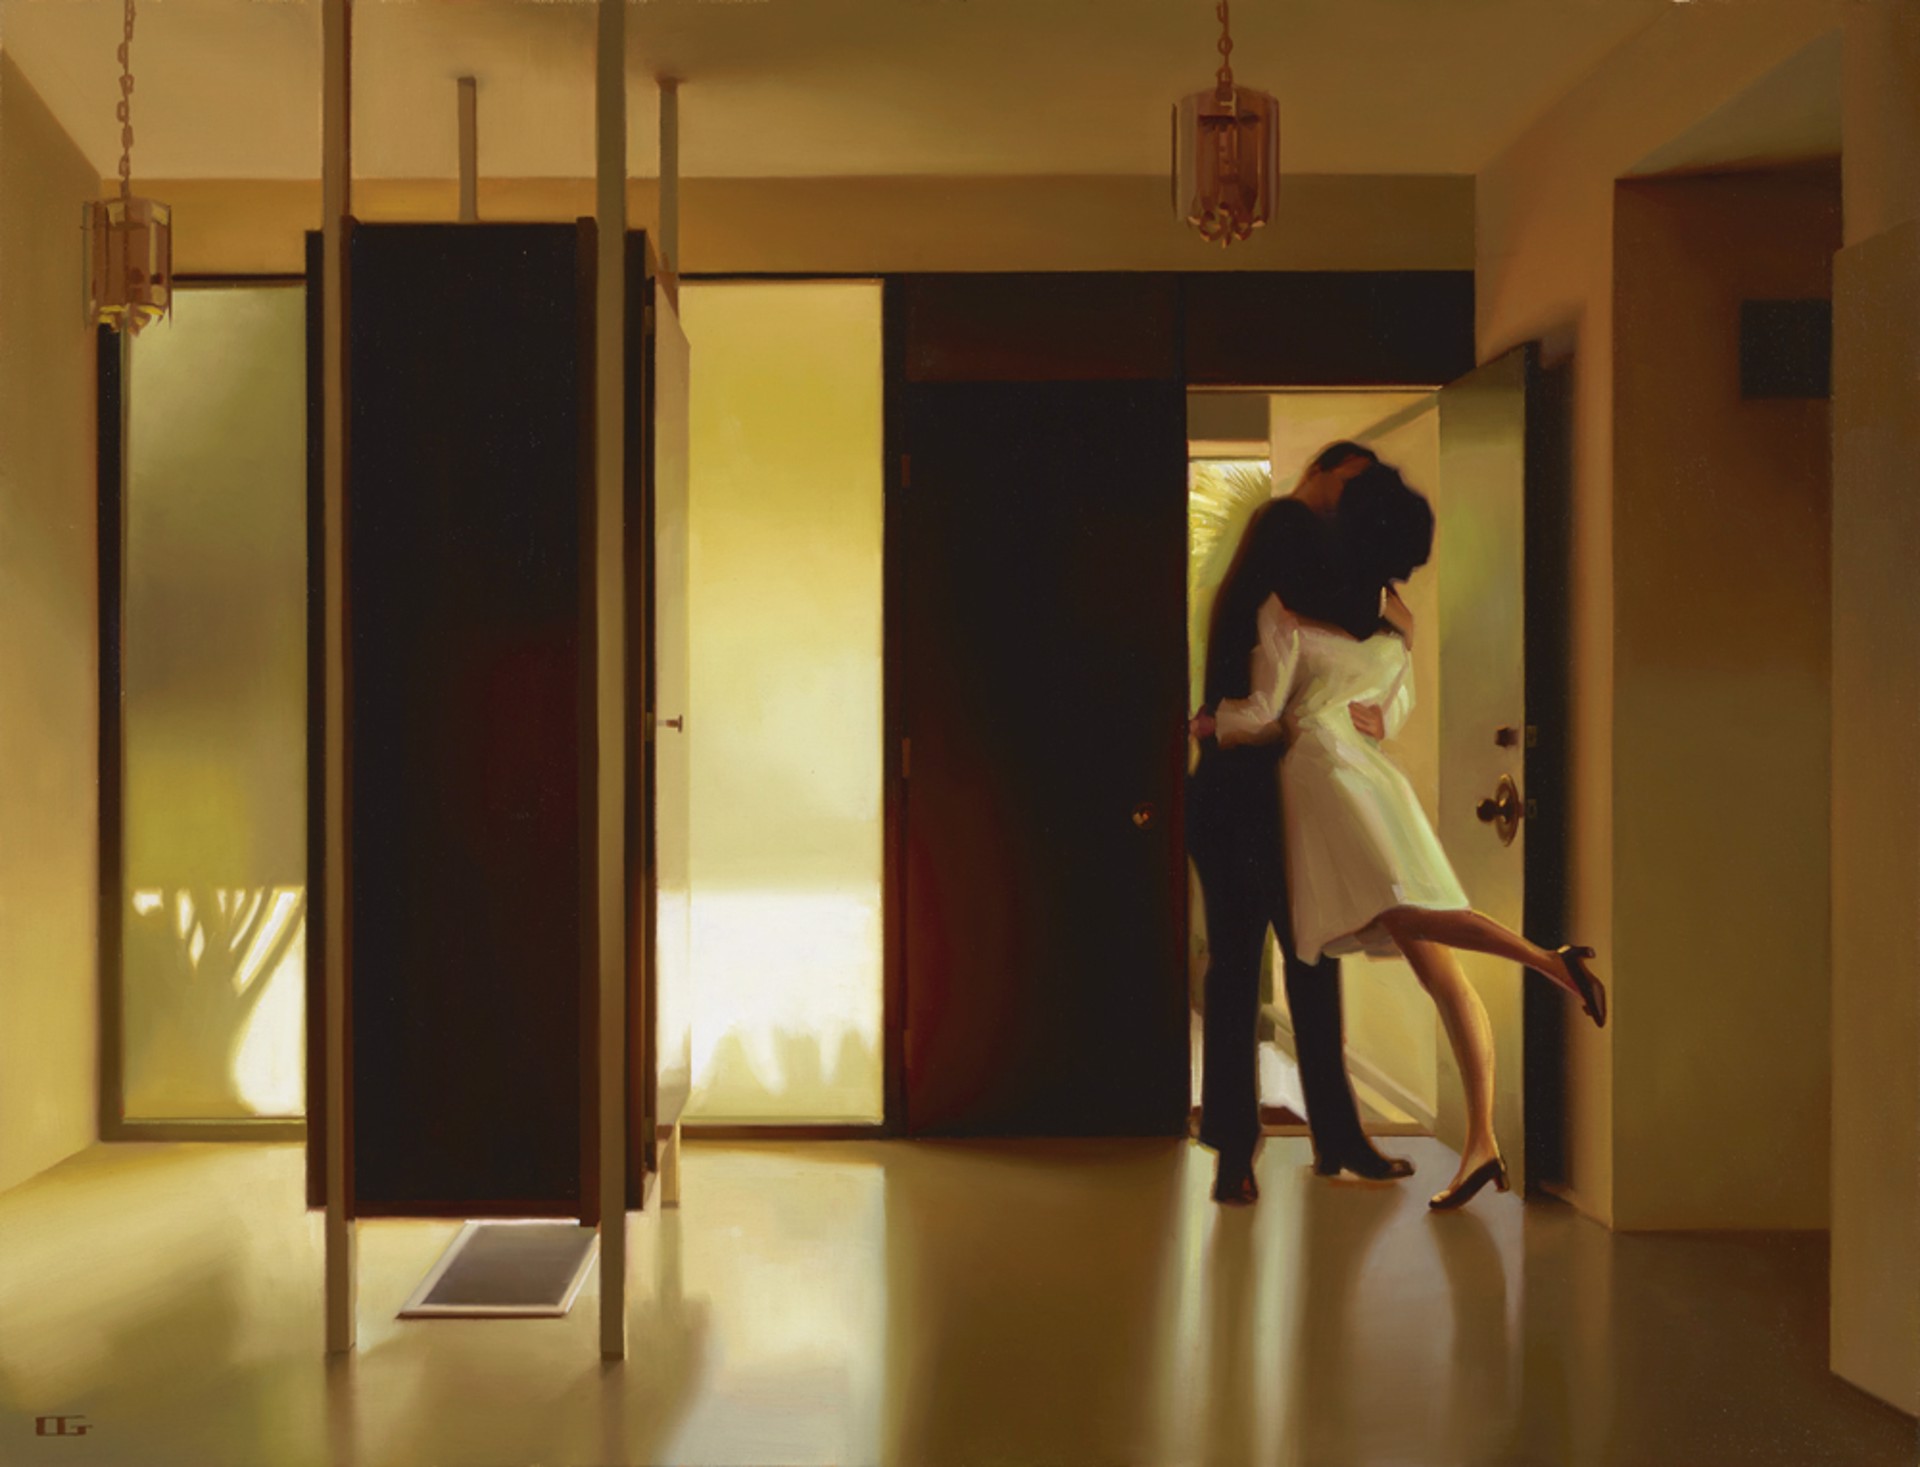 There’s Love in This Home (S/N) by Carrie Graber